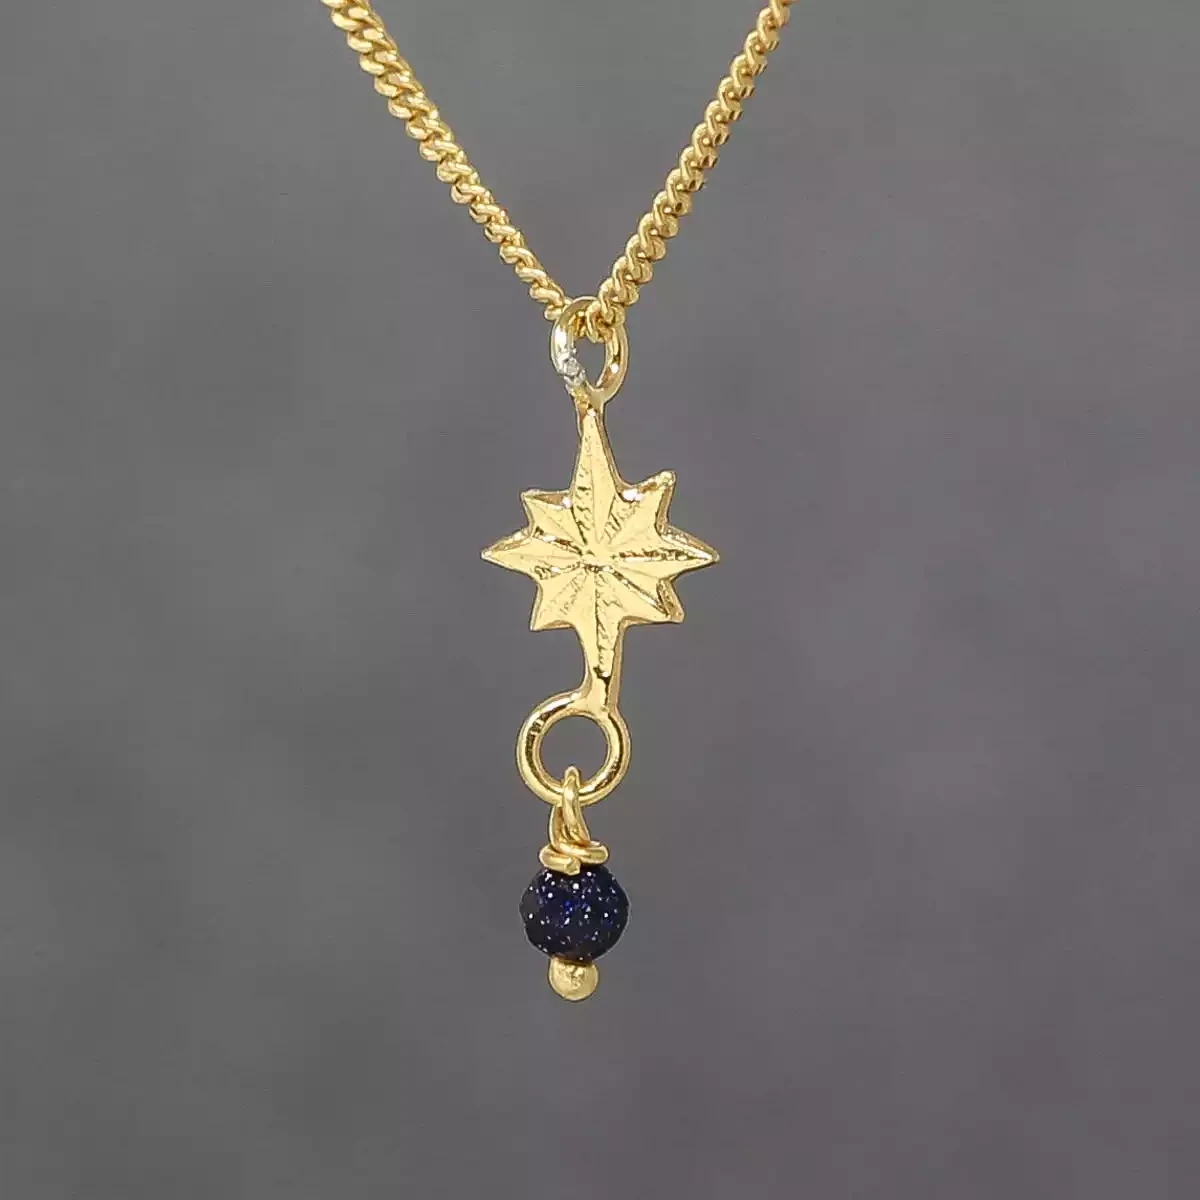 Star 22ct Gold Plate Pendant With Goldstone Charm by Amanda Coleman